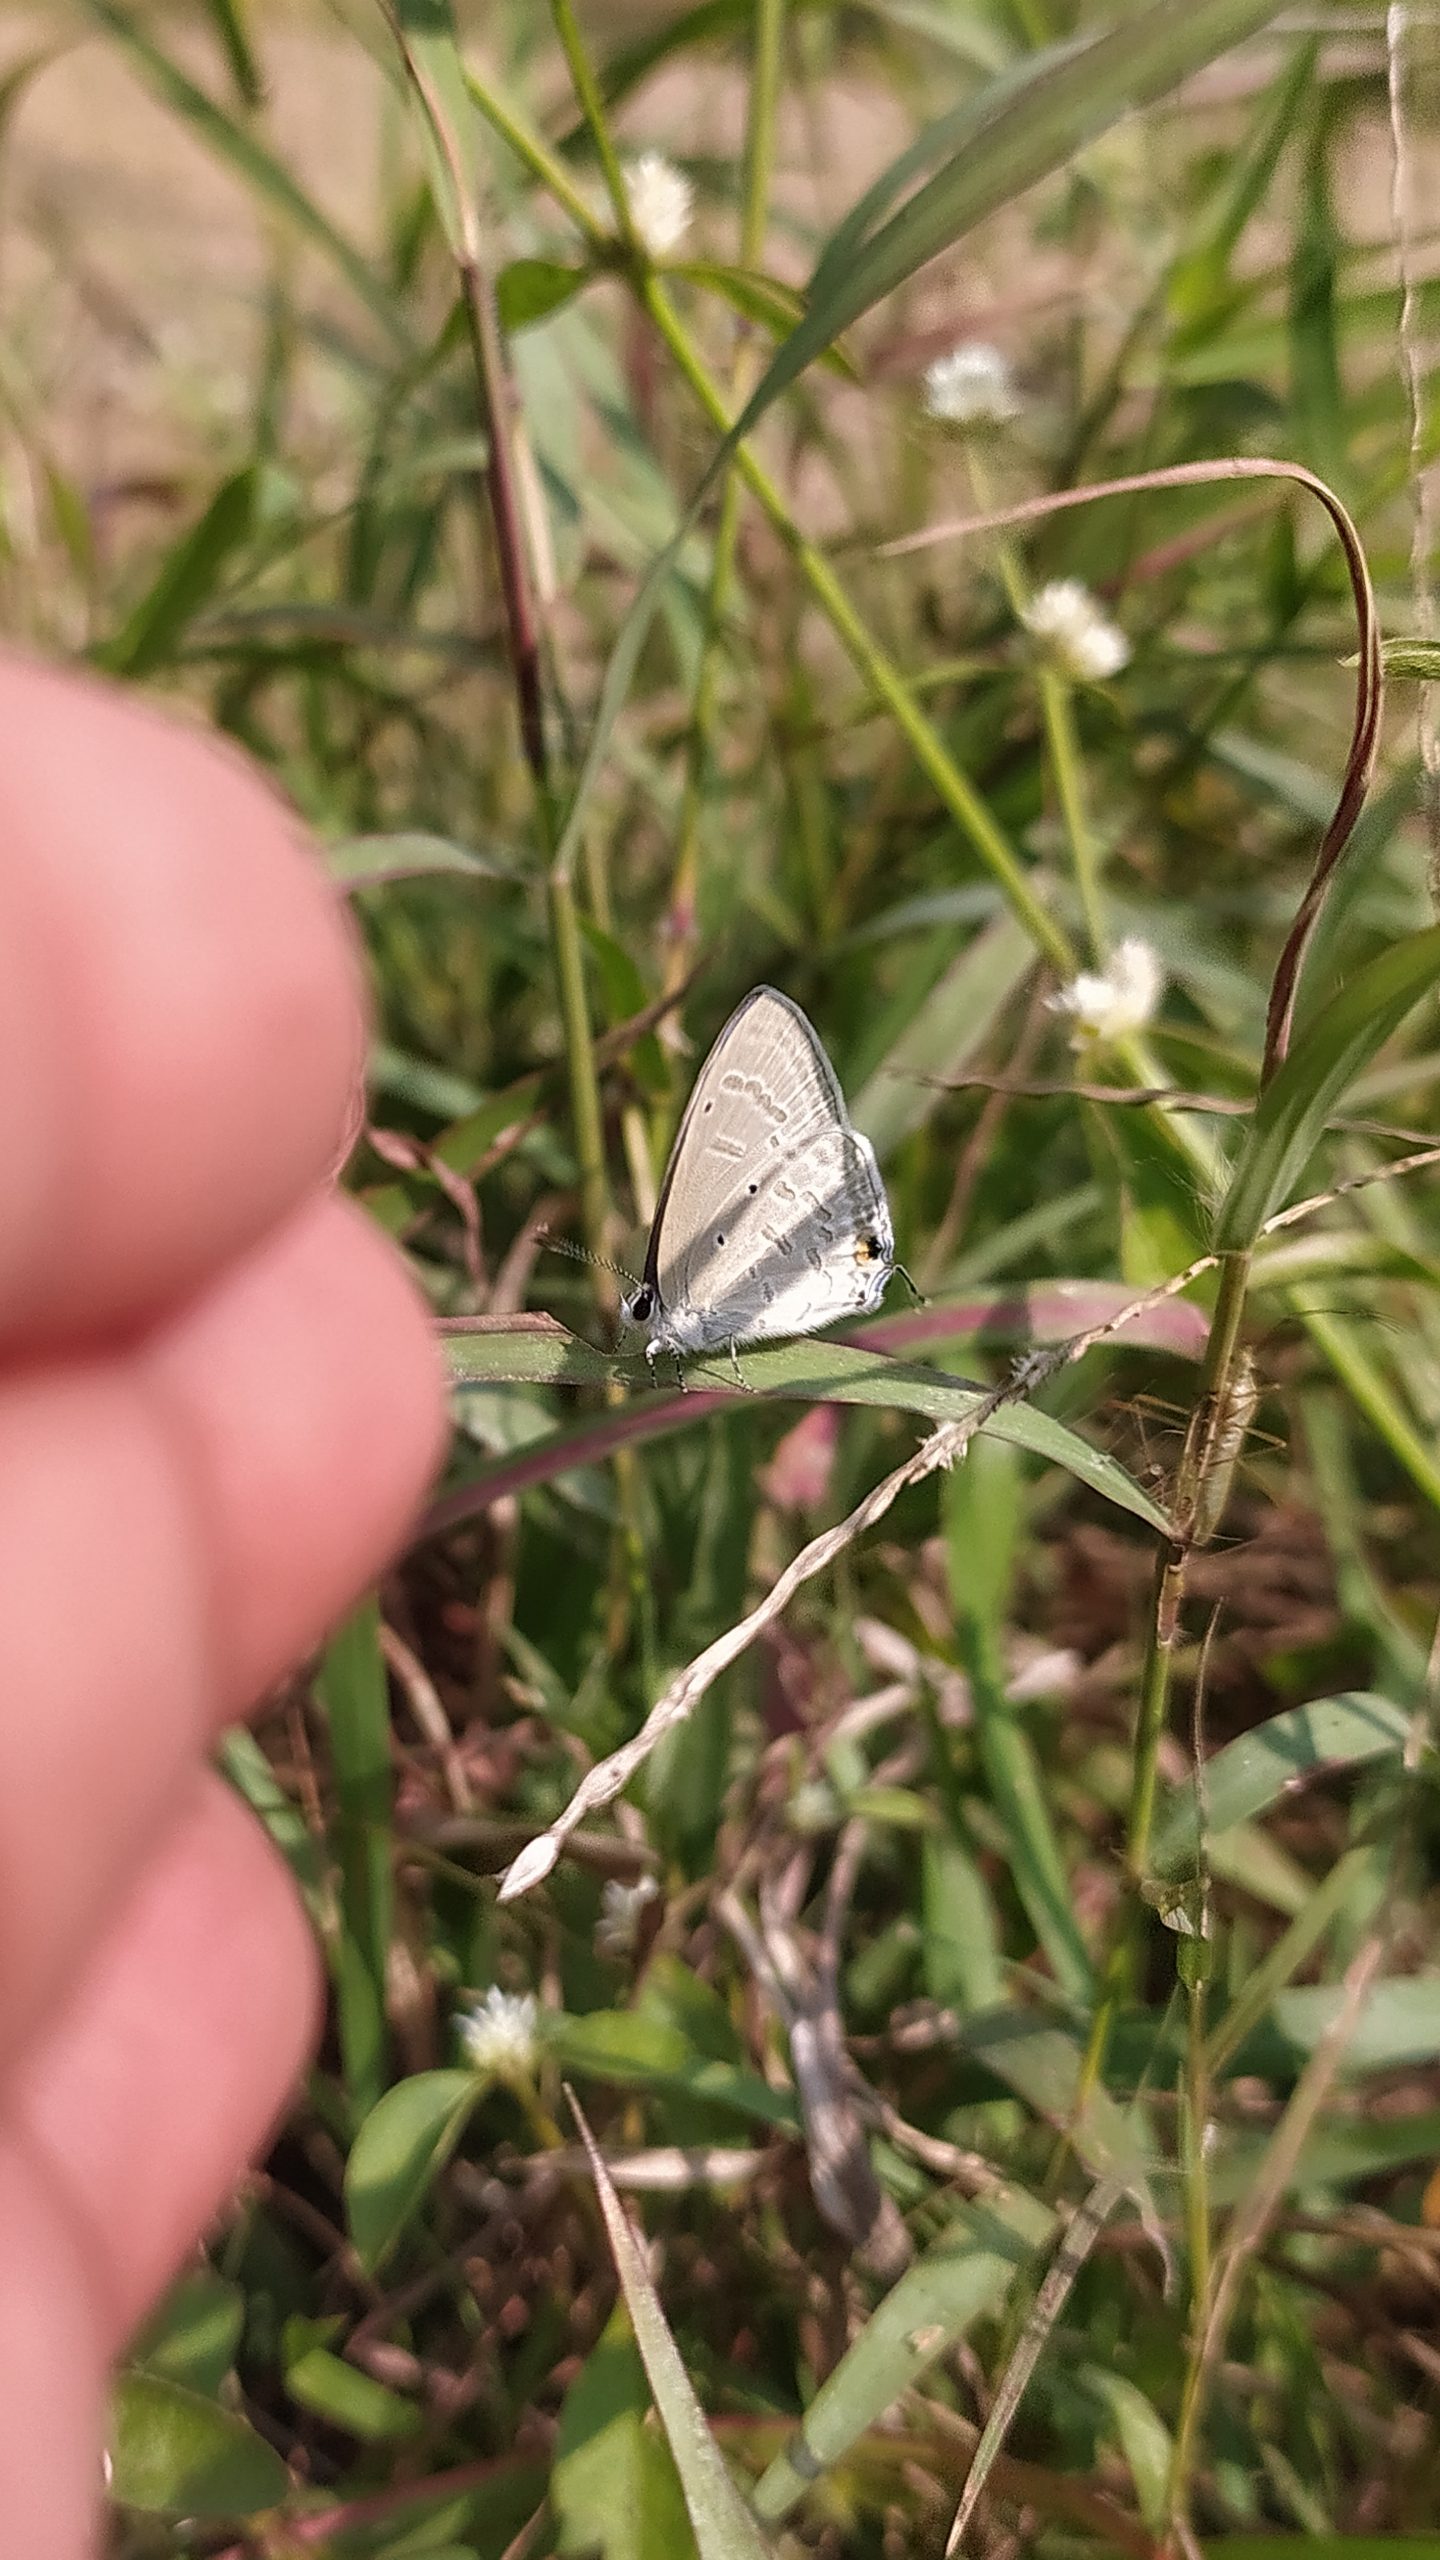 A small butterfly